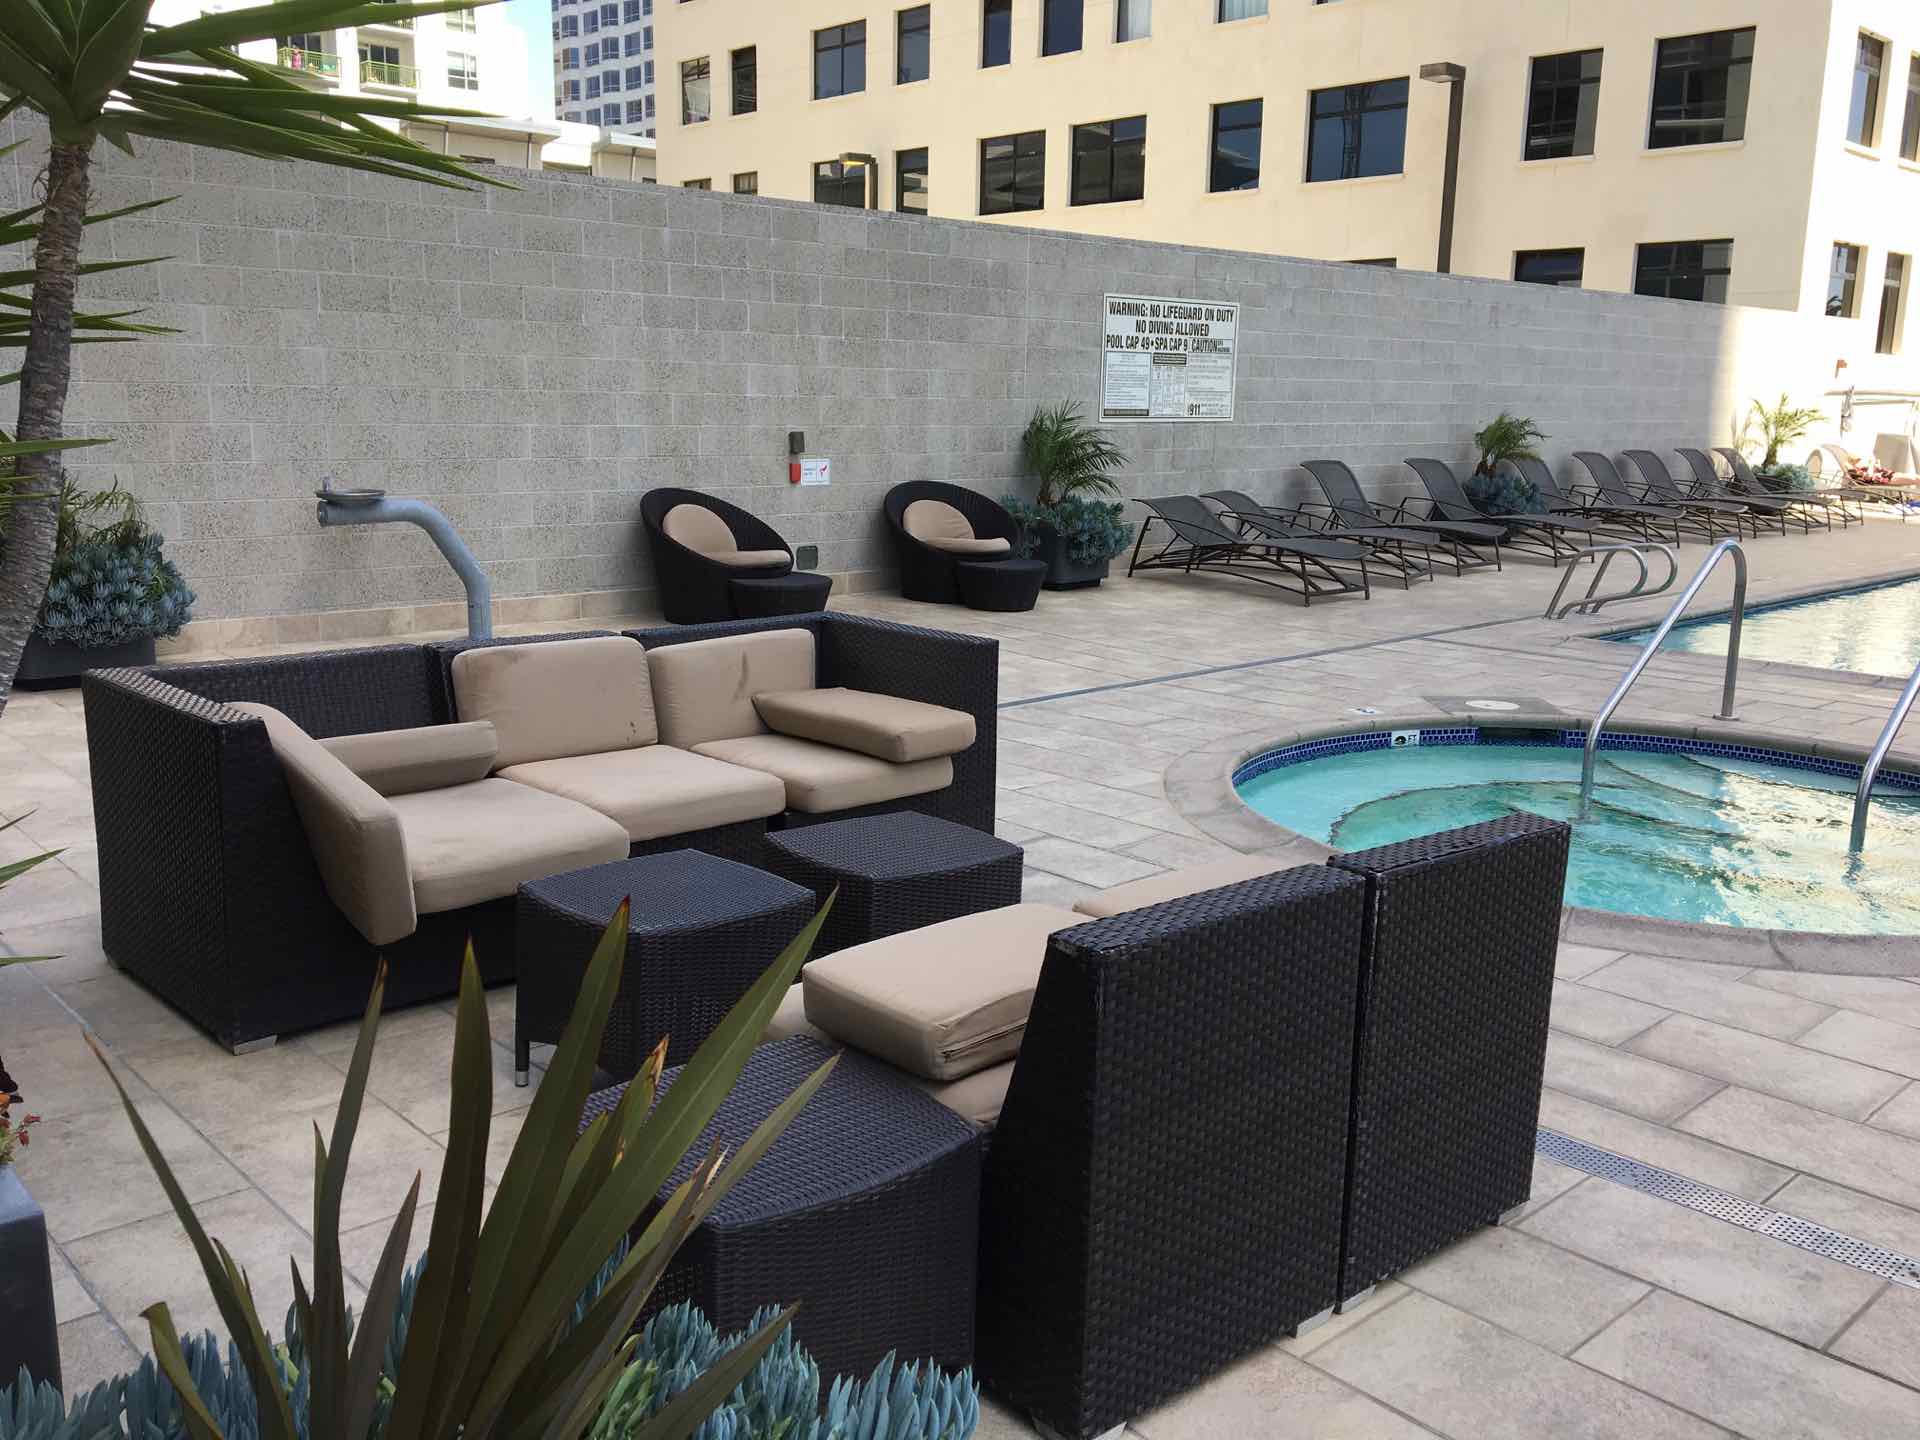 Pool Deck with adjacent seating area and cabanas